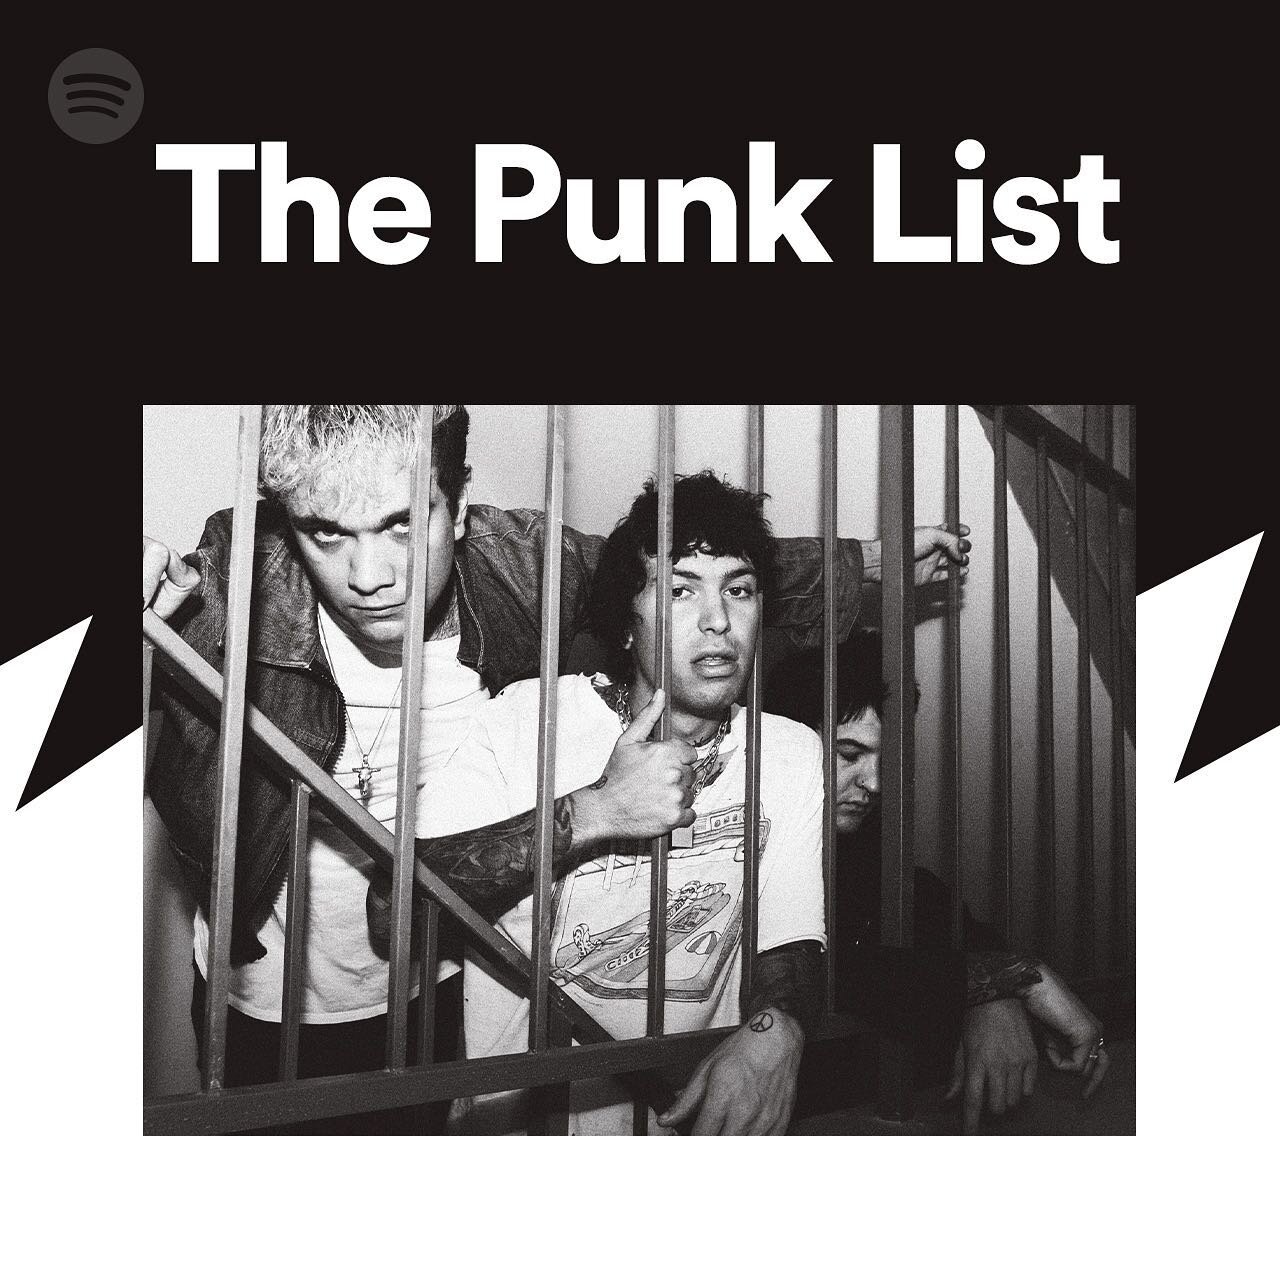 Big love to @spotifyuk for putting us on the cover of The Punk List. Such a sick playlist playlist which now includes &lsquo;All The Rage&rsquo; 💚